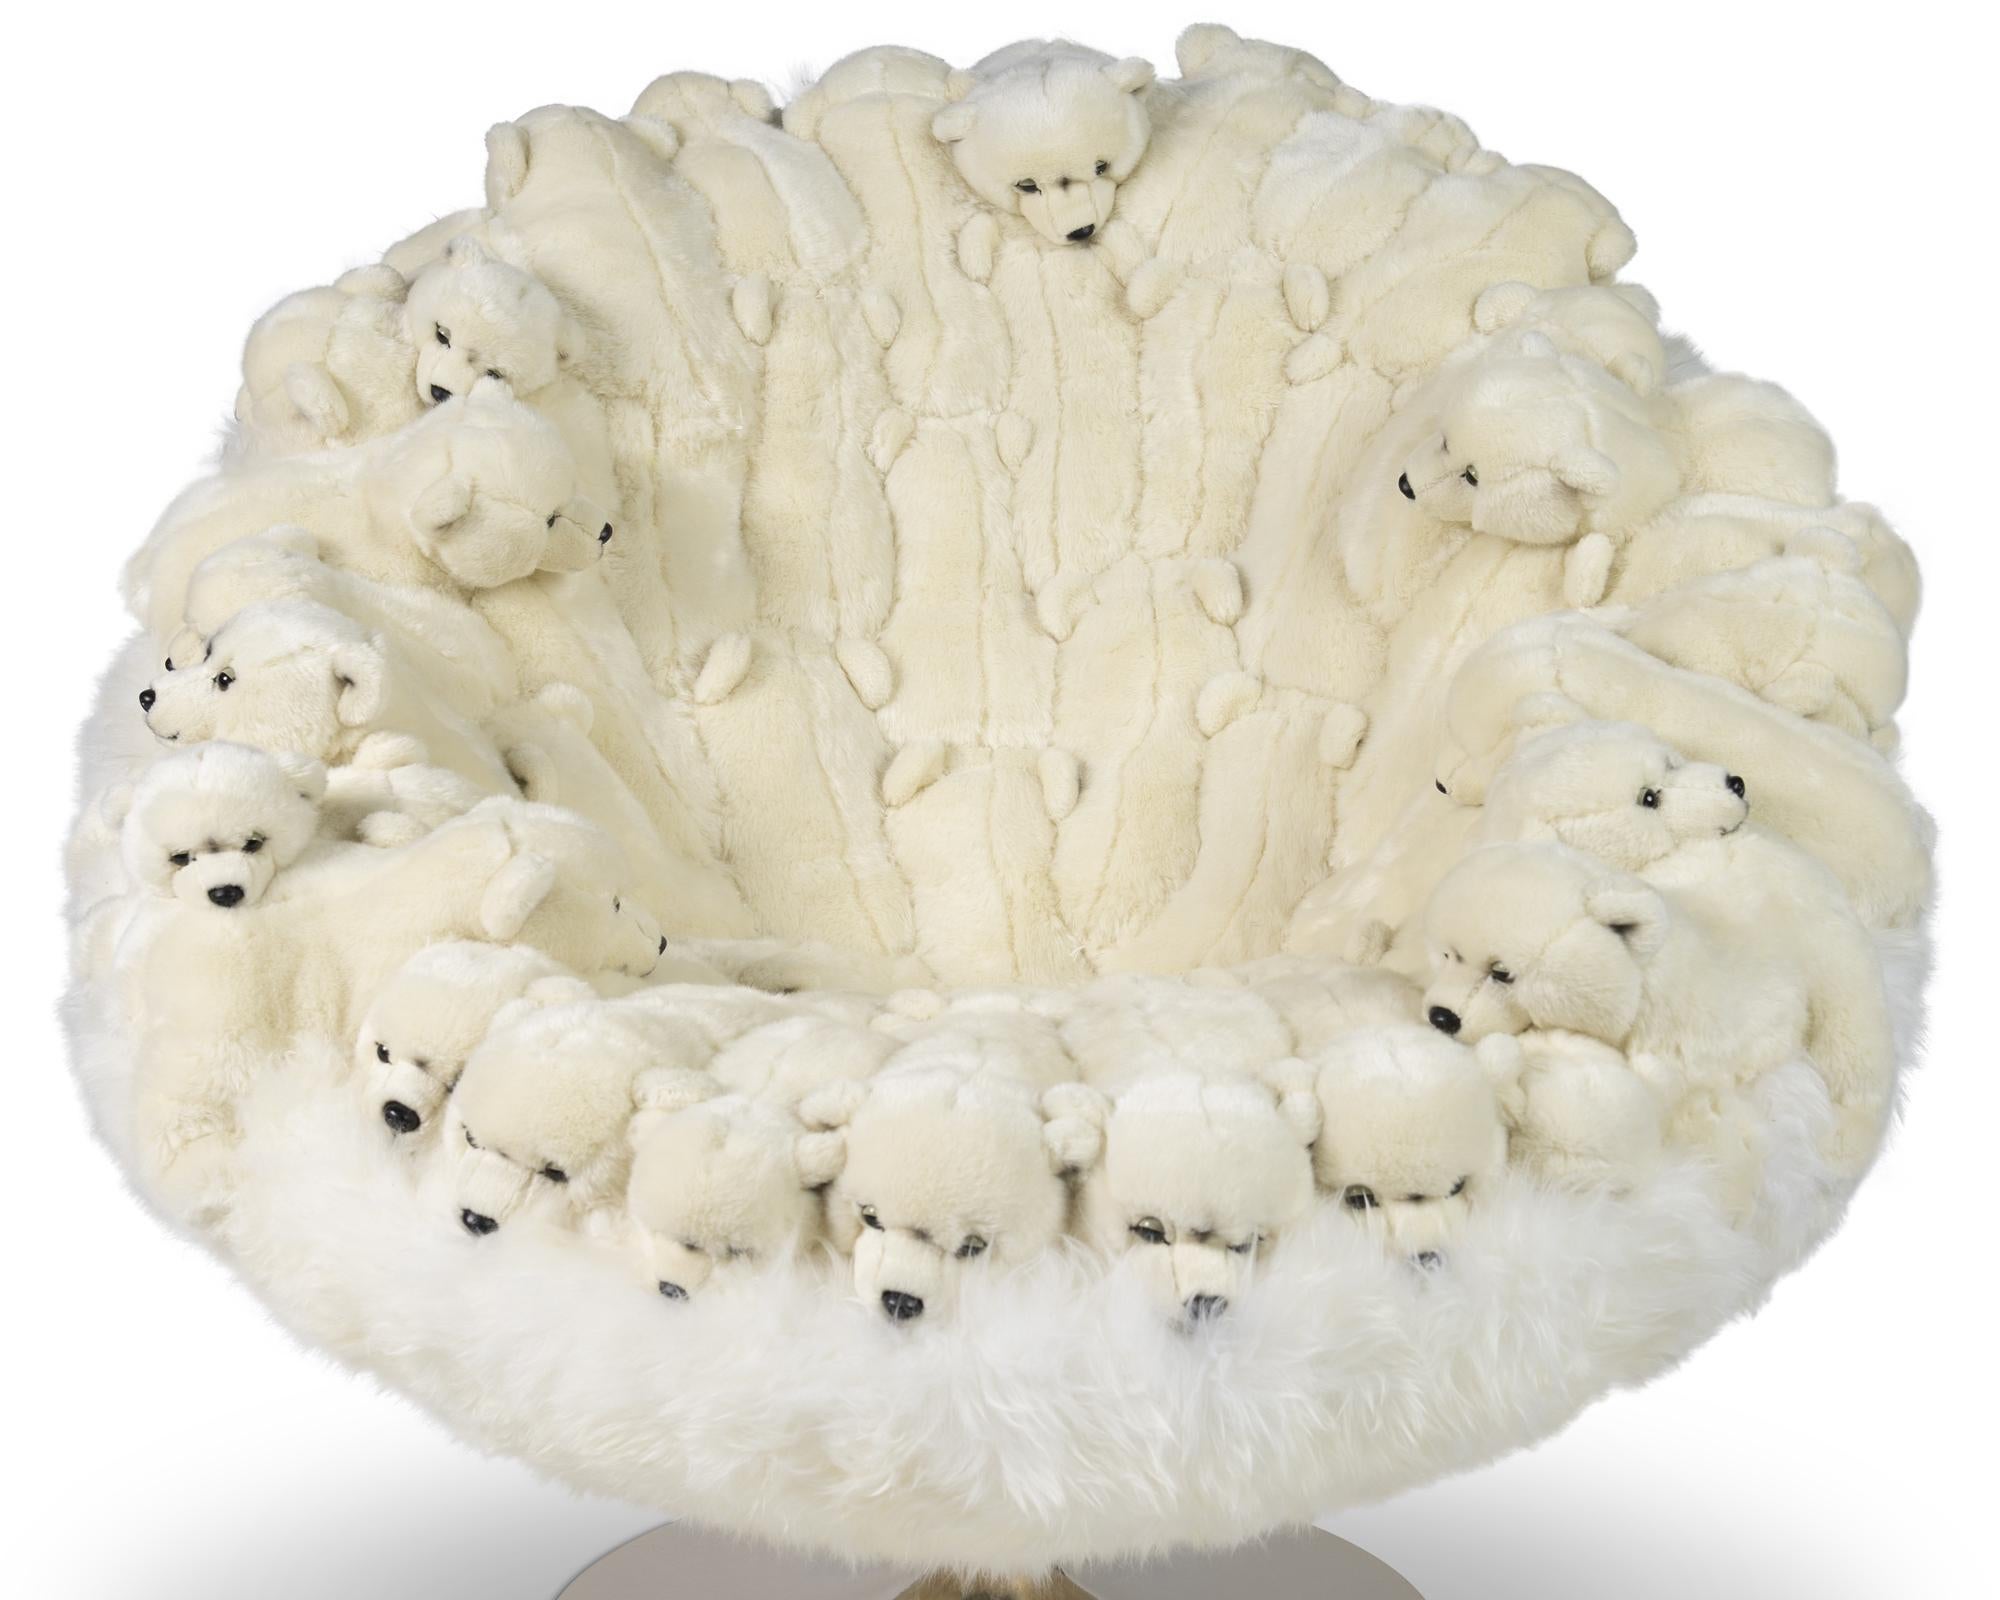 Armchair Polar Plush baby Bears made with small plush seals
on all the back seat. Minutely handmade piece, handcrafted
details with high quality synthetic white fur and white hairs.
Exceptional piece, limited edition of 30 pieces.